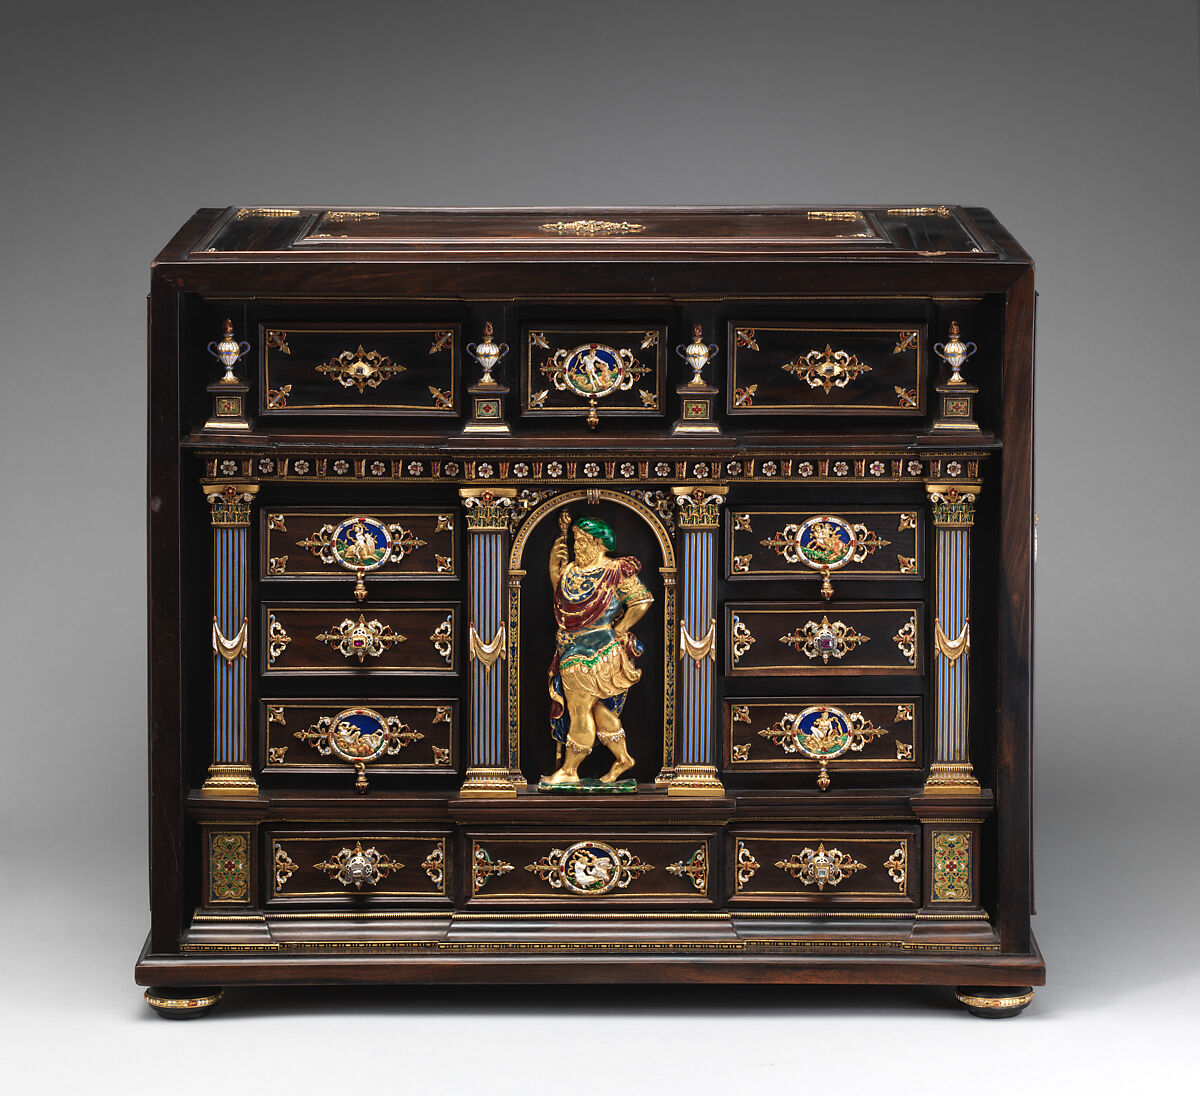 Cabinet with gold mounts and relief, After a design by Reinhold Vasters (German, Erkelenz 1827–1909 Aachen), Pine and walnut veneered with ebony; gold, enamel, diamonds, rubies, German, Aachen 